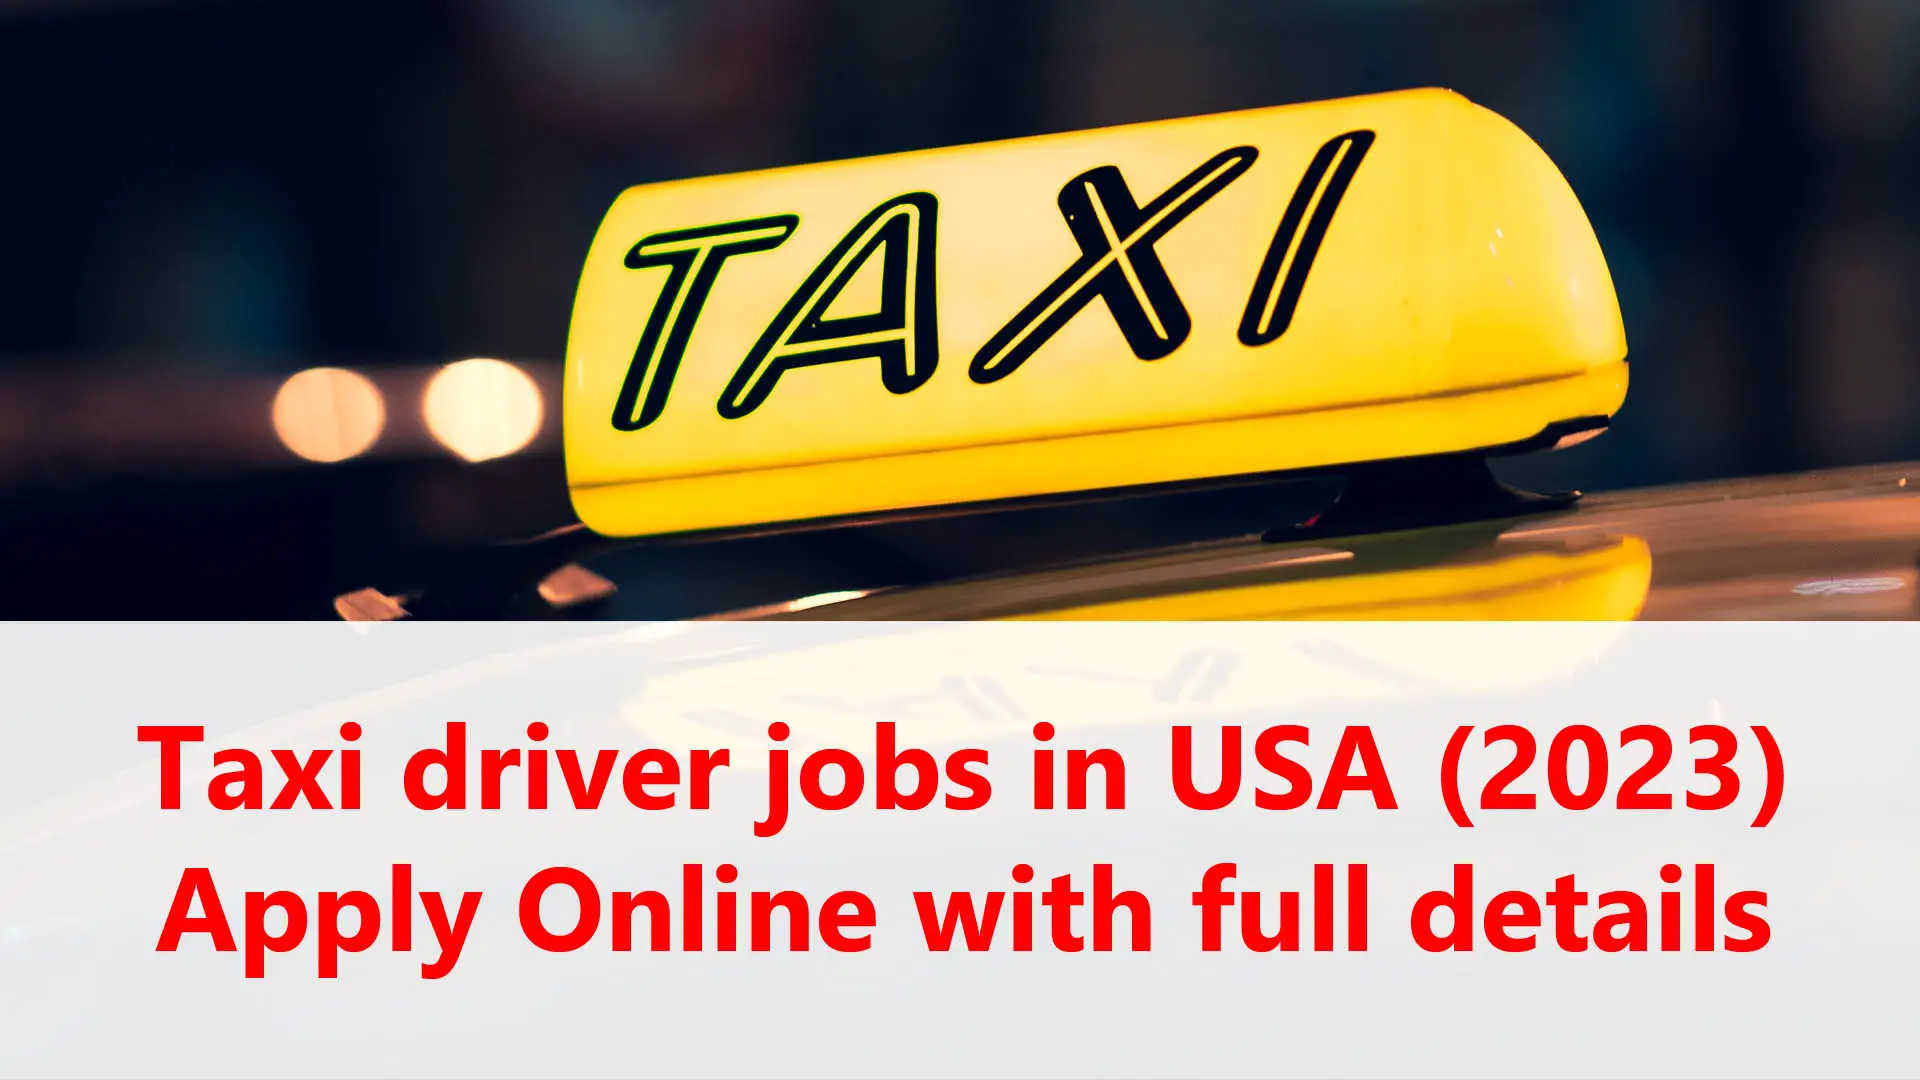 Uber Driver Jobs in the USA Visa 2023/24